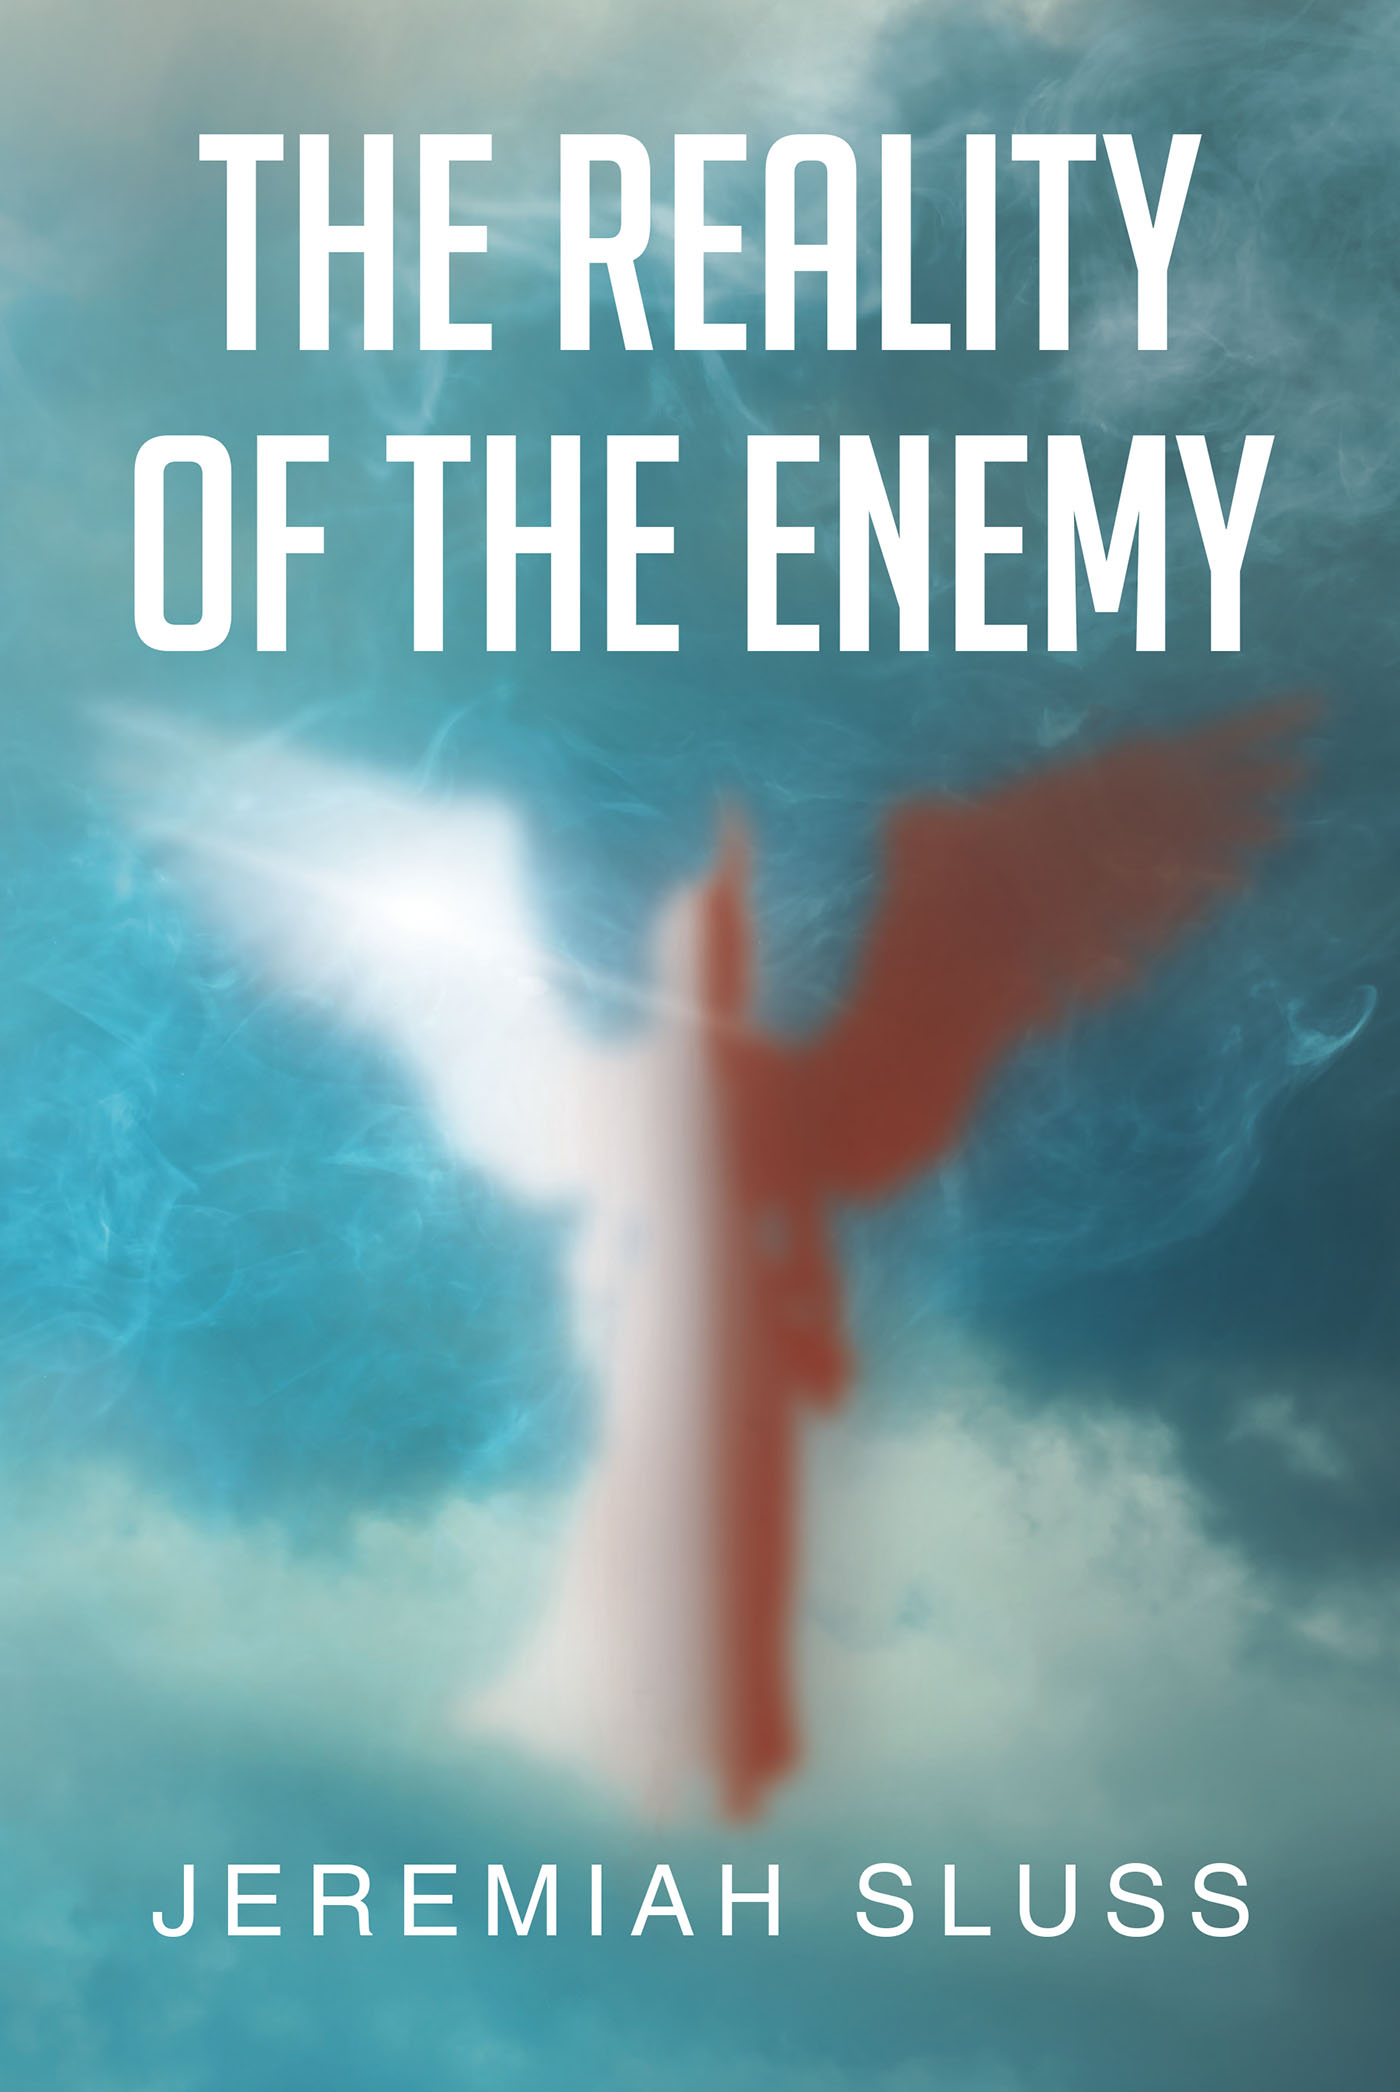 Jeremiah Sluss’s Newly Released "The Reality of the Enemy" is an Informative Discussion of Spiritual Warfare and Tactics of Evil